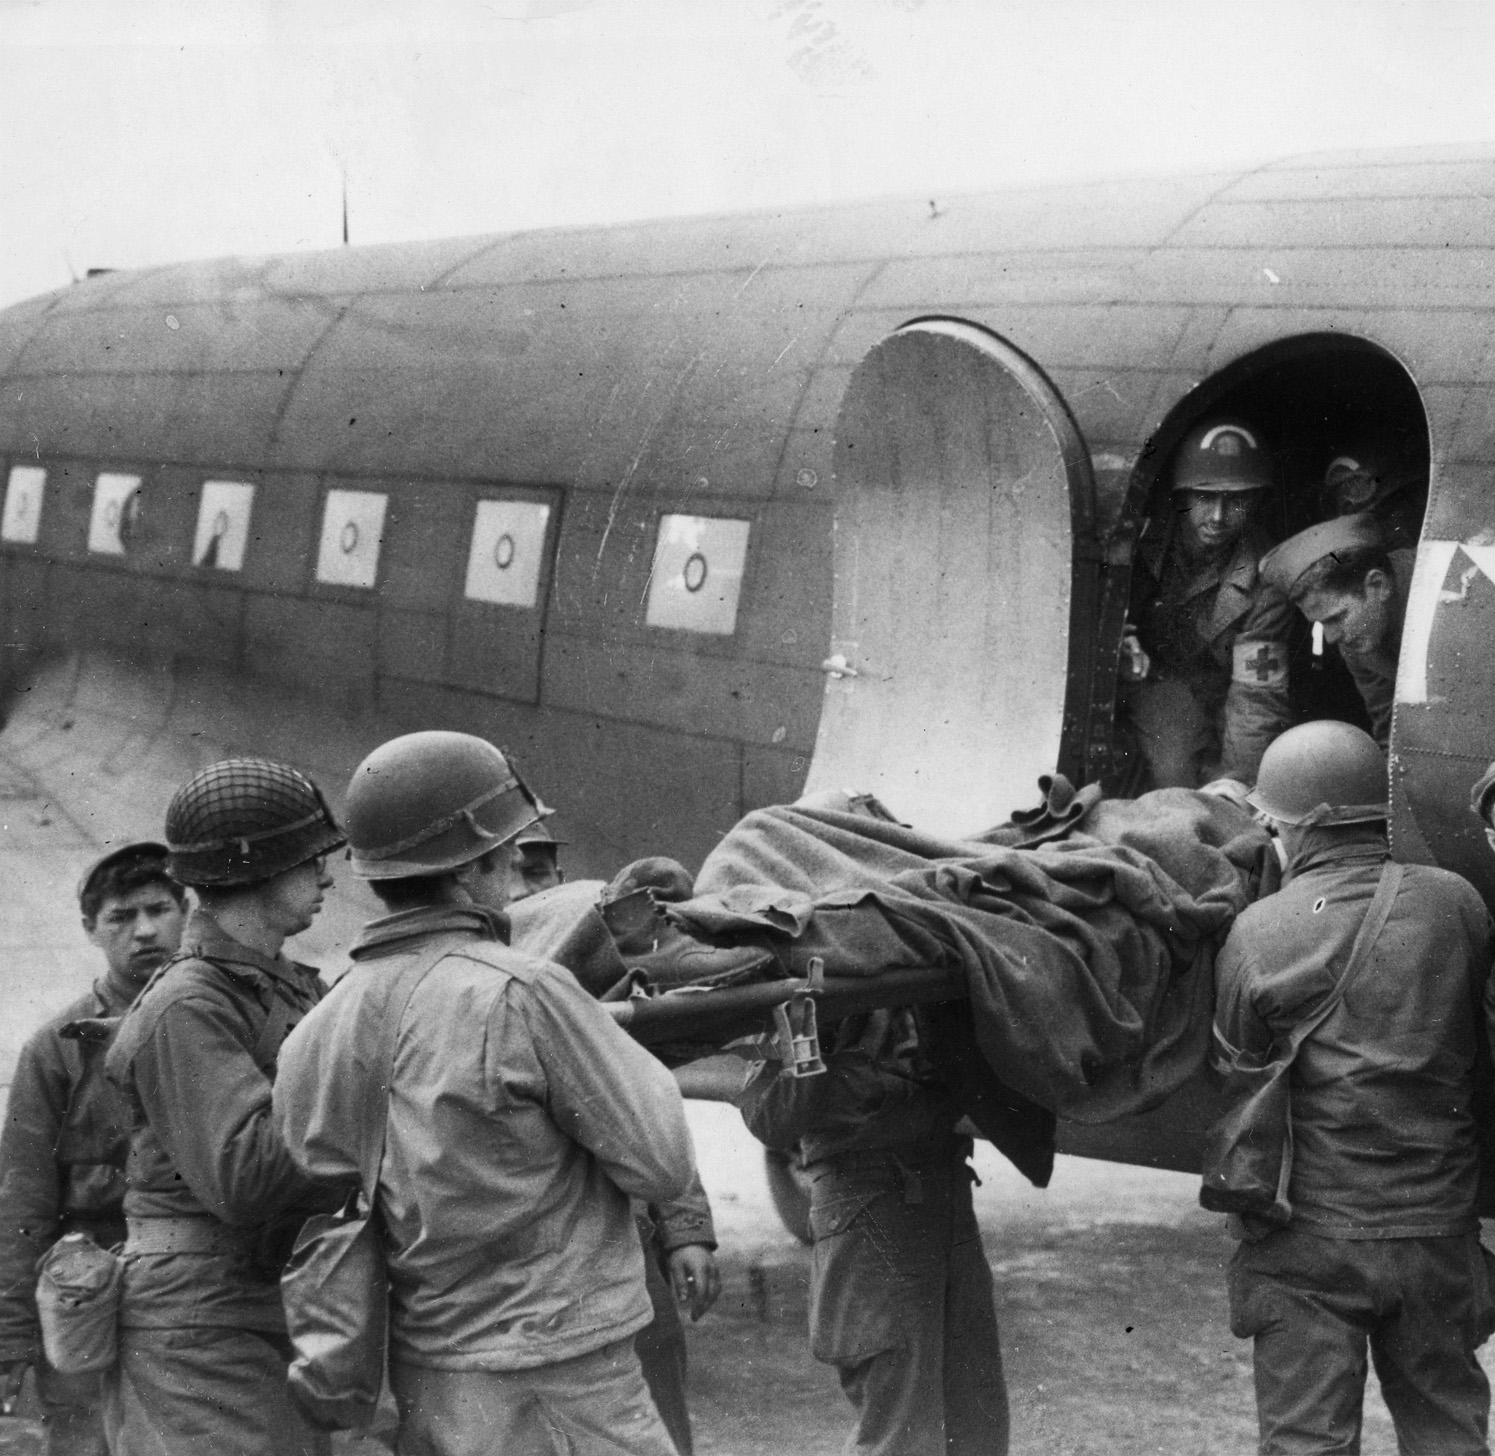 The C-47 served as a cargo plane and troop transport throughout the war, and large numbers of  the aircraft, the military conversion of the Douglas DC-3 civilian airliner, were constructed. In this photo,  a wounded soldier on a stretcher is being lifted aboard a C-47 for evacuation from France to England.